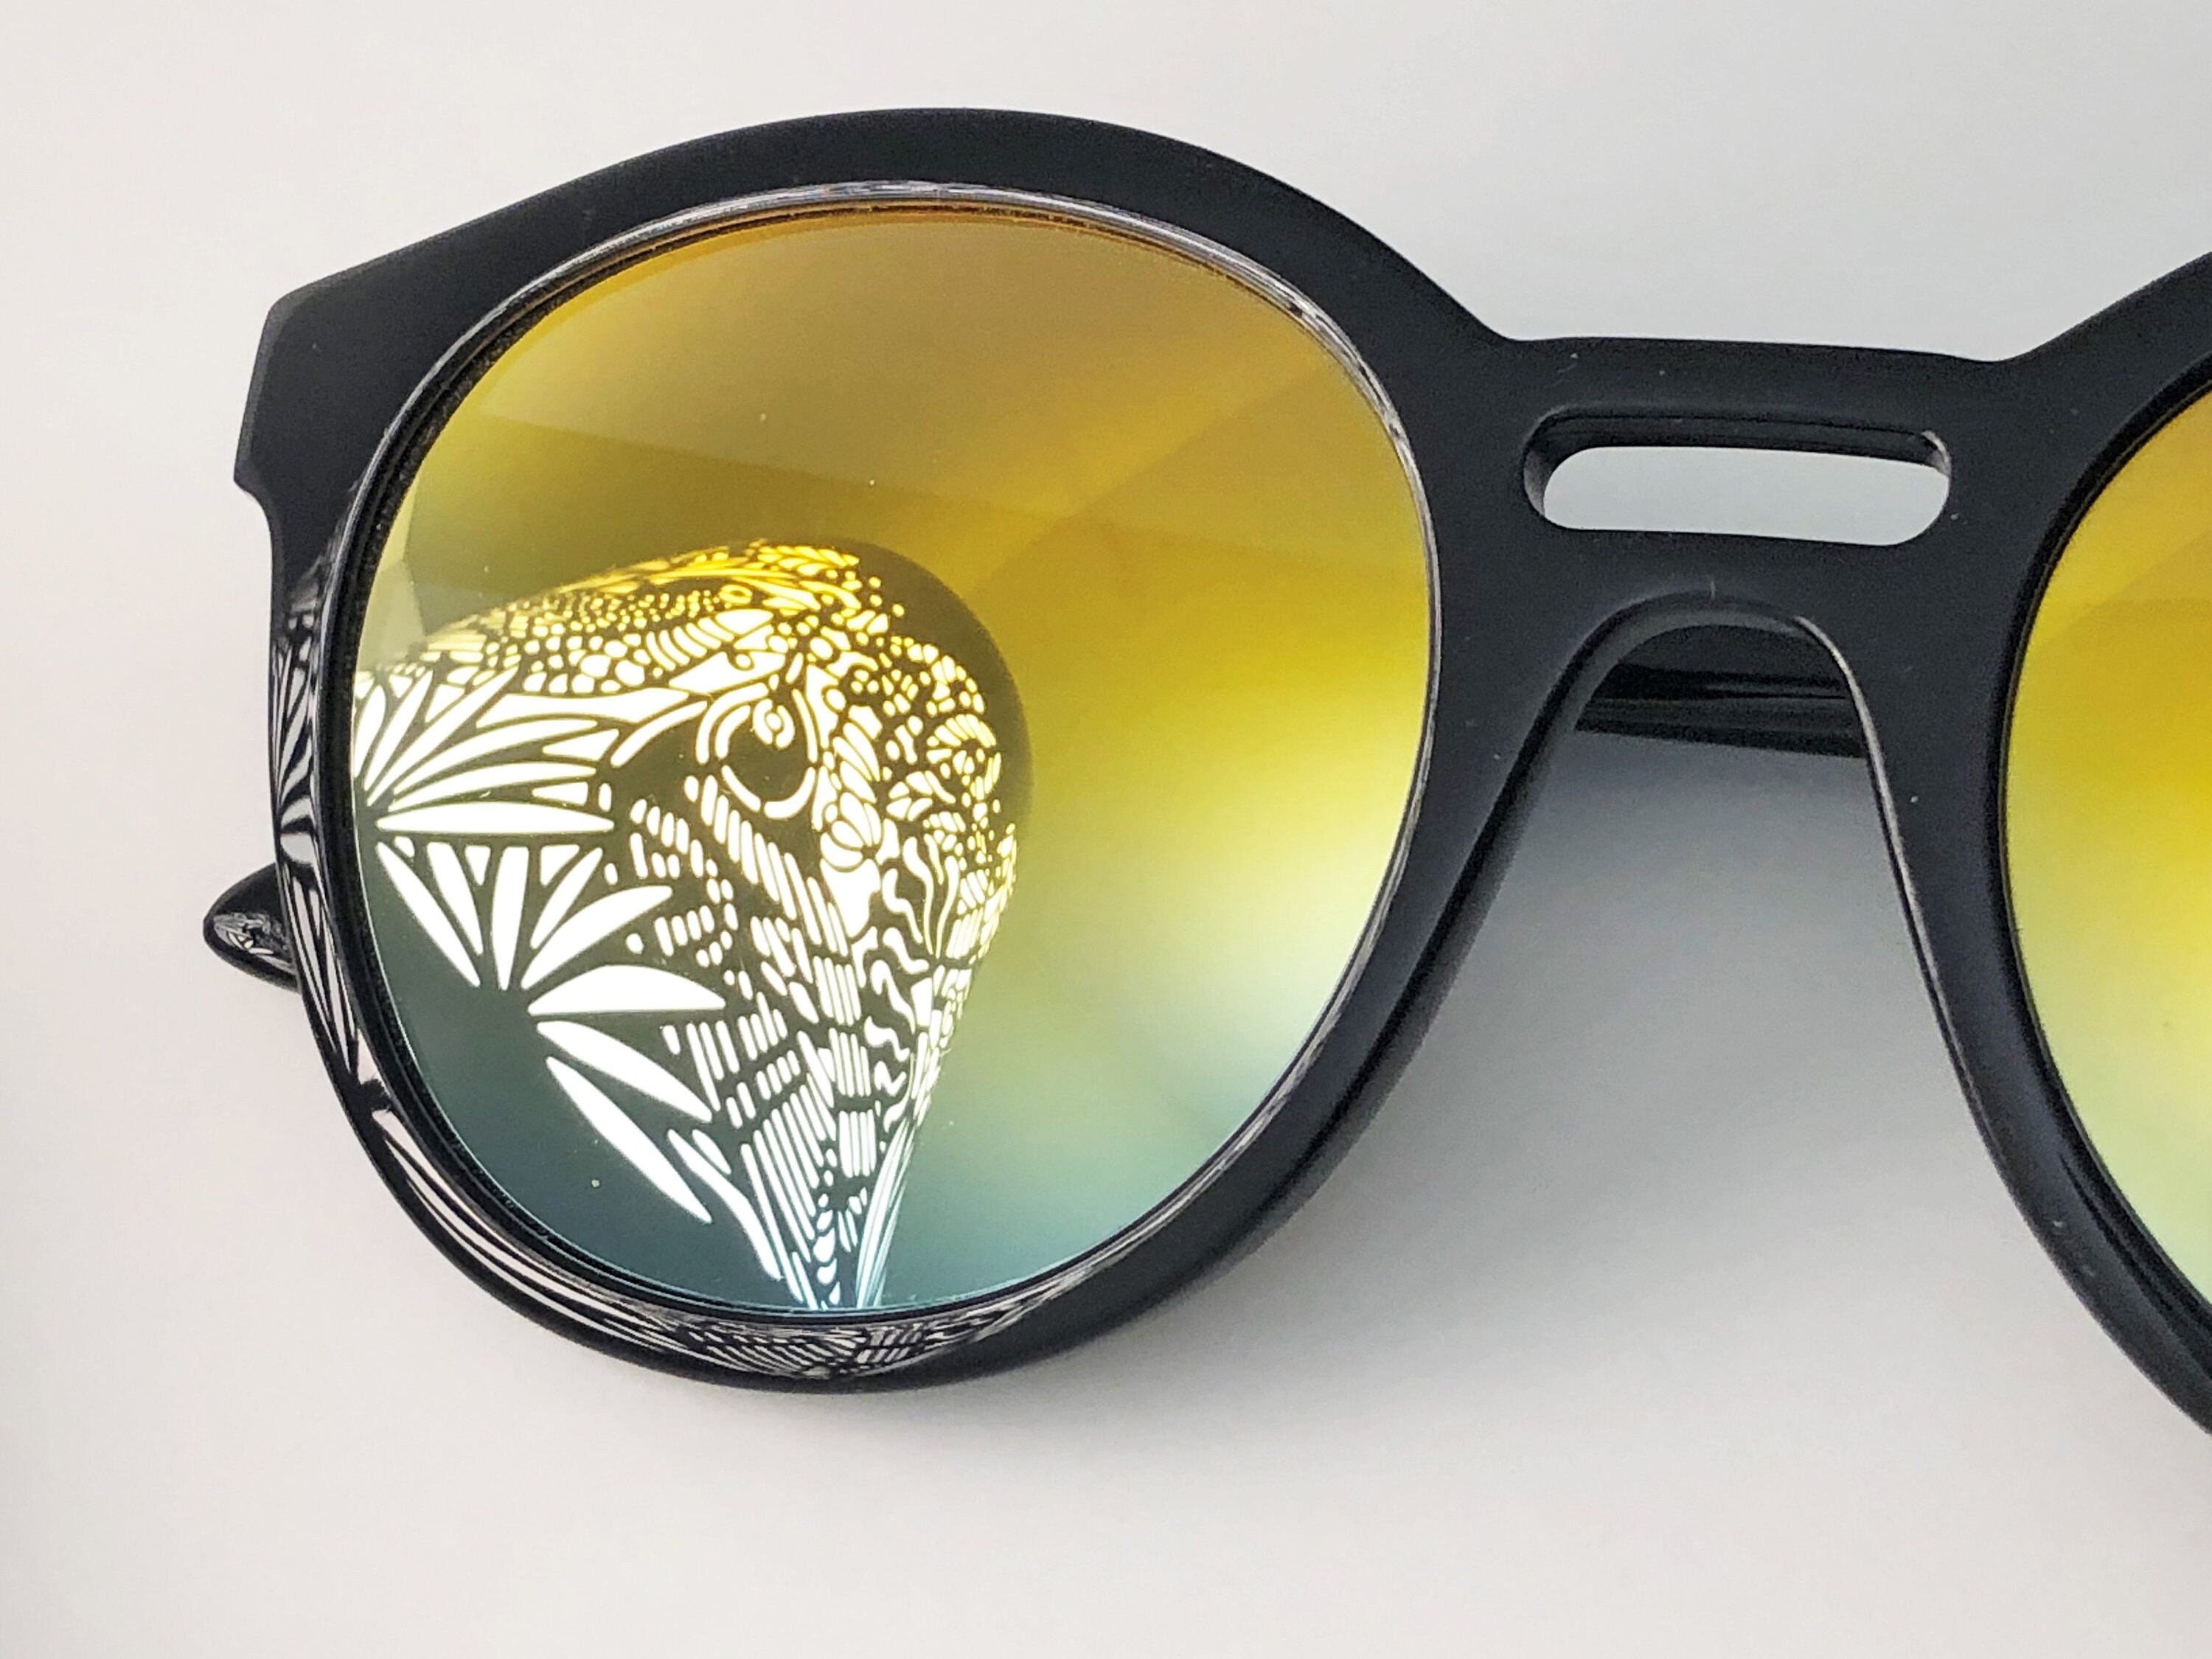 KBL New Roc Model Sunglasses With Mirrored Gradient